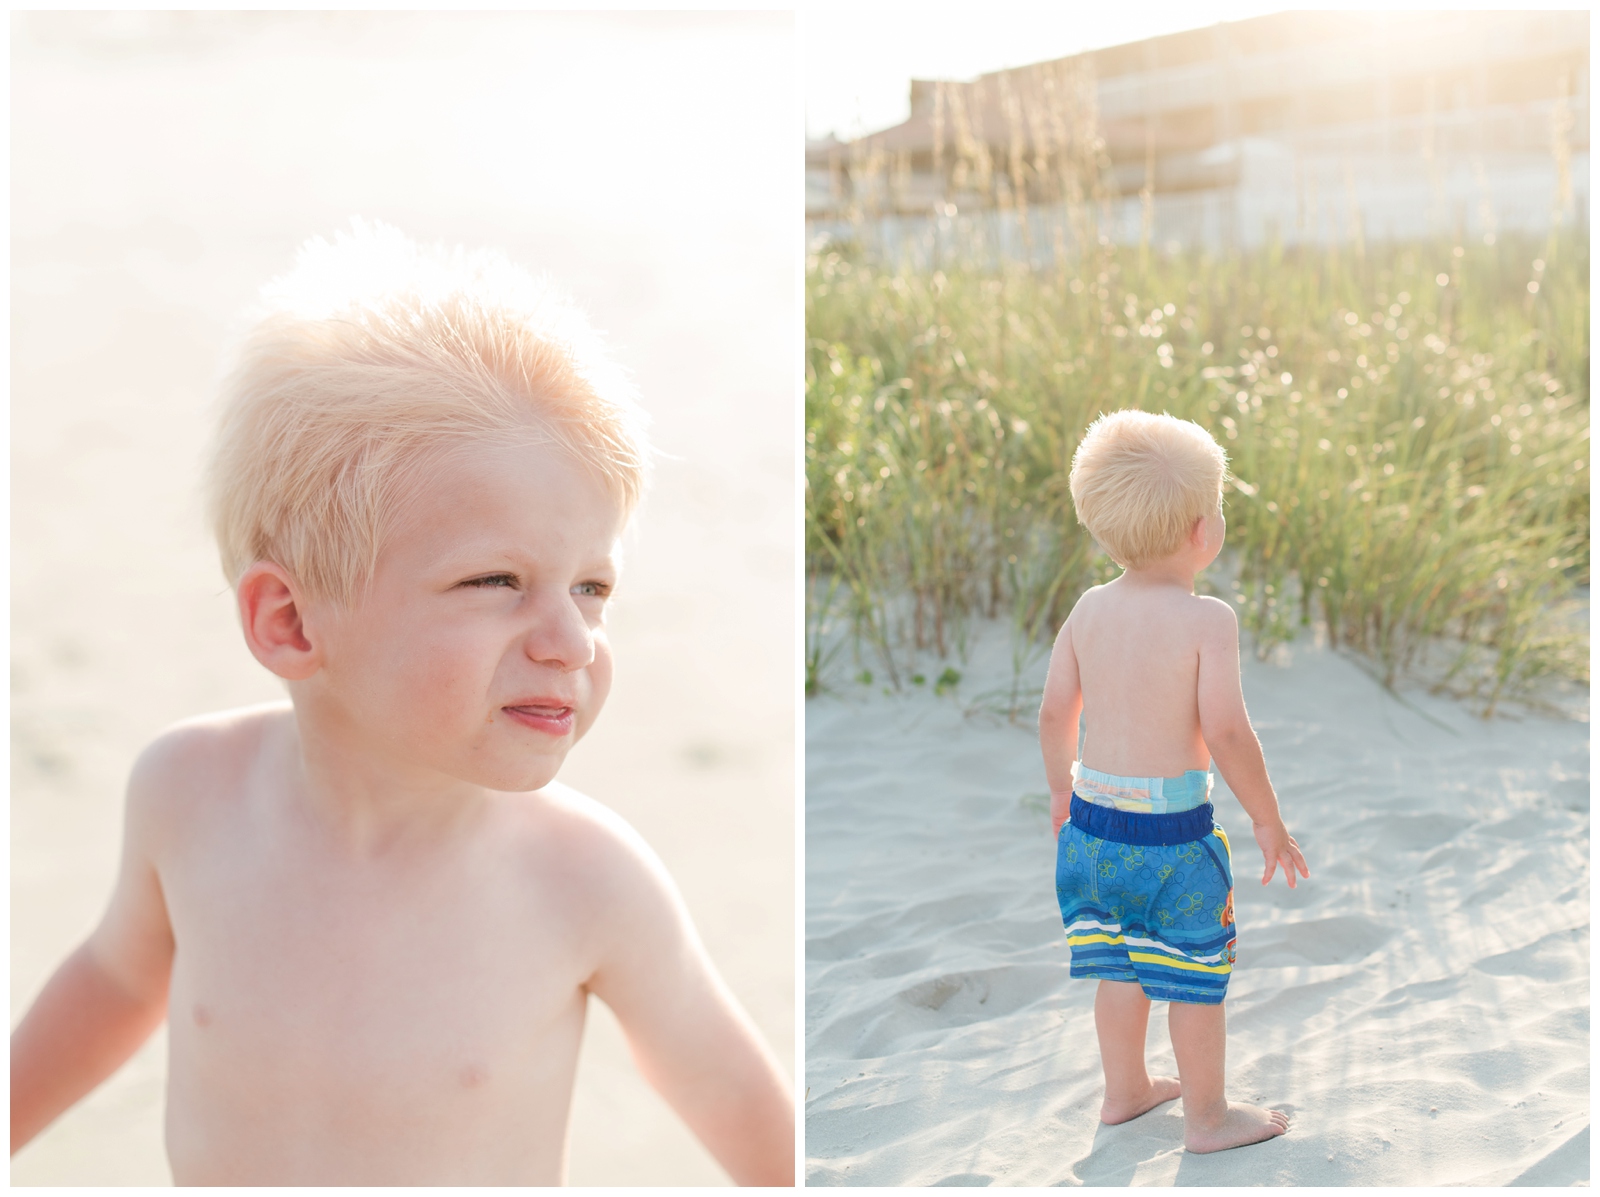 family vacation family portrait session, toddler photo session on the beach ocean front North Myrtle Beach South Carolina Oceanfront Fun Family Vacation dune grass photos 